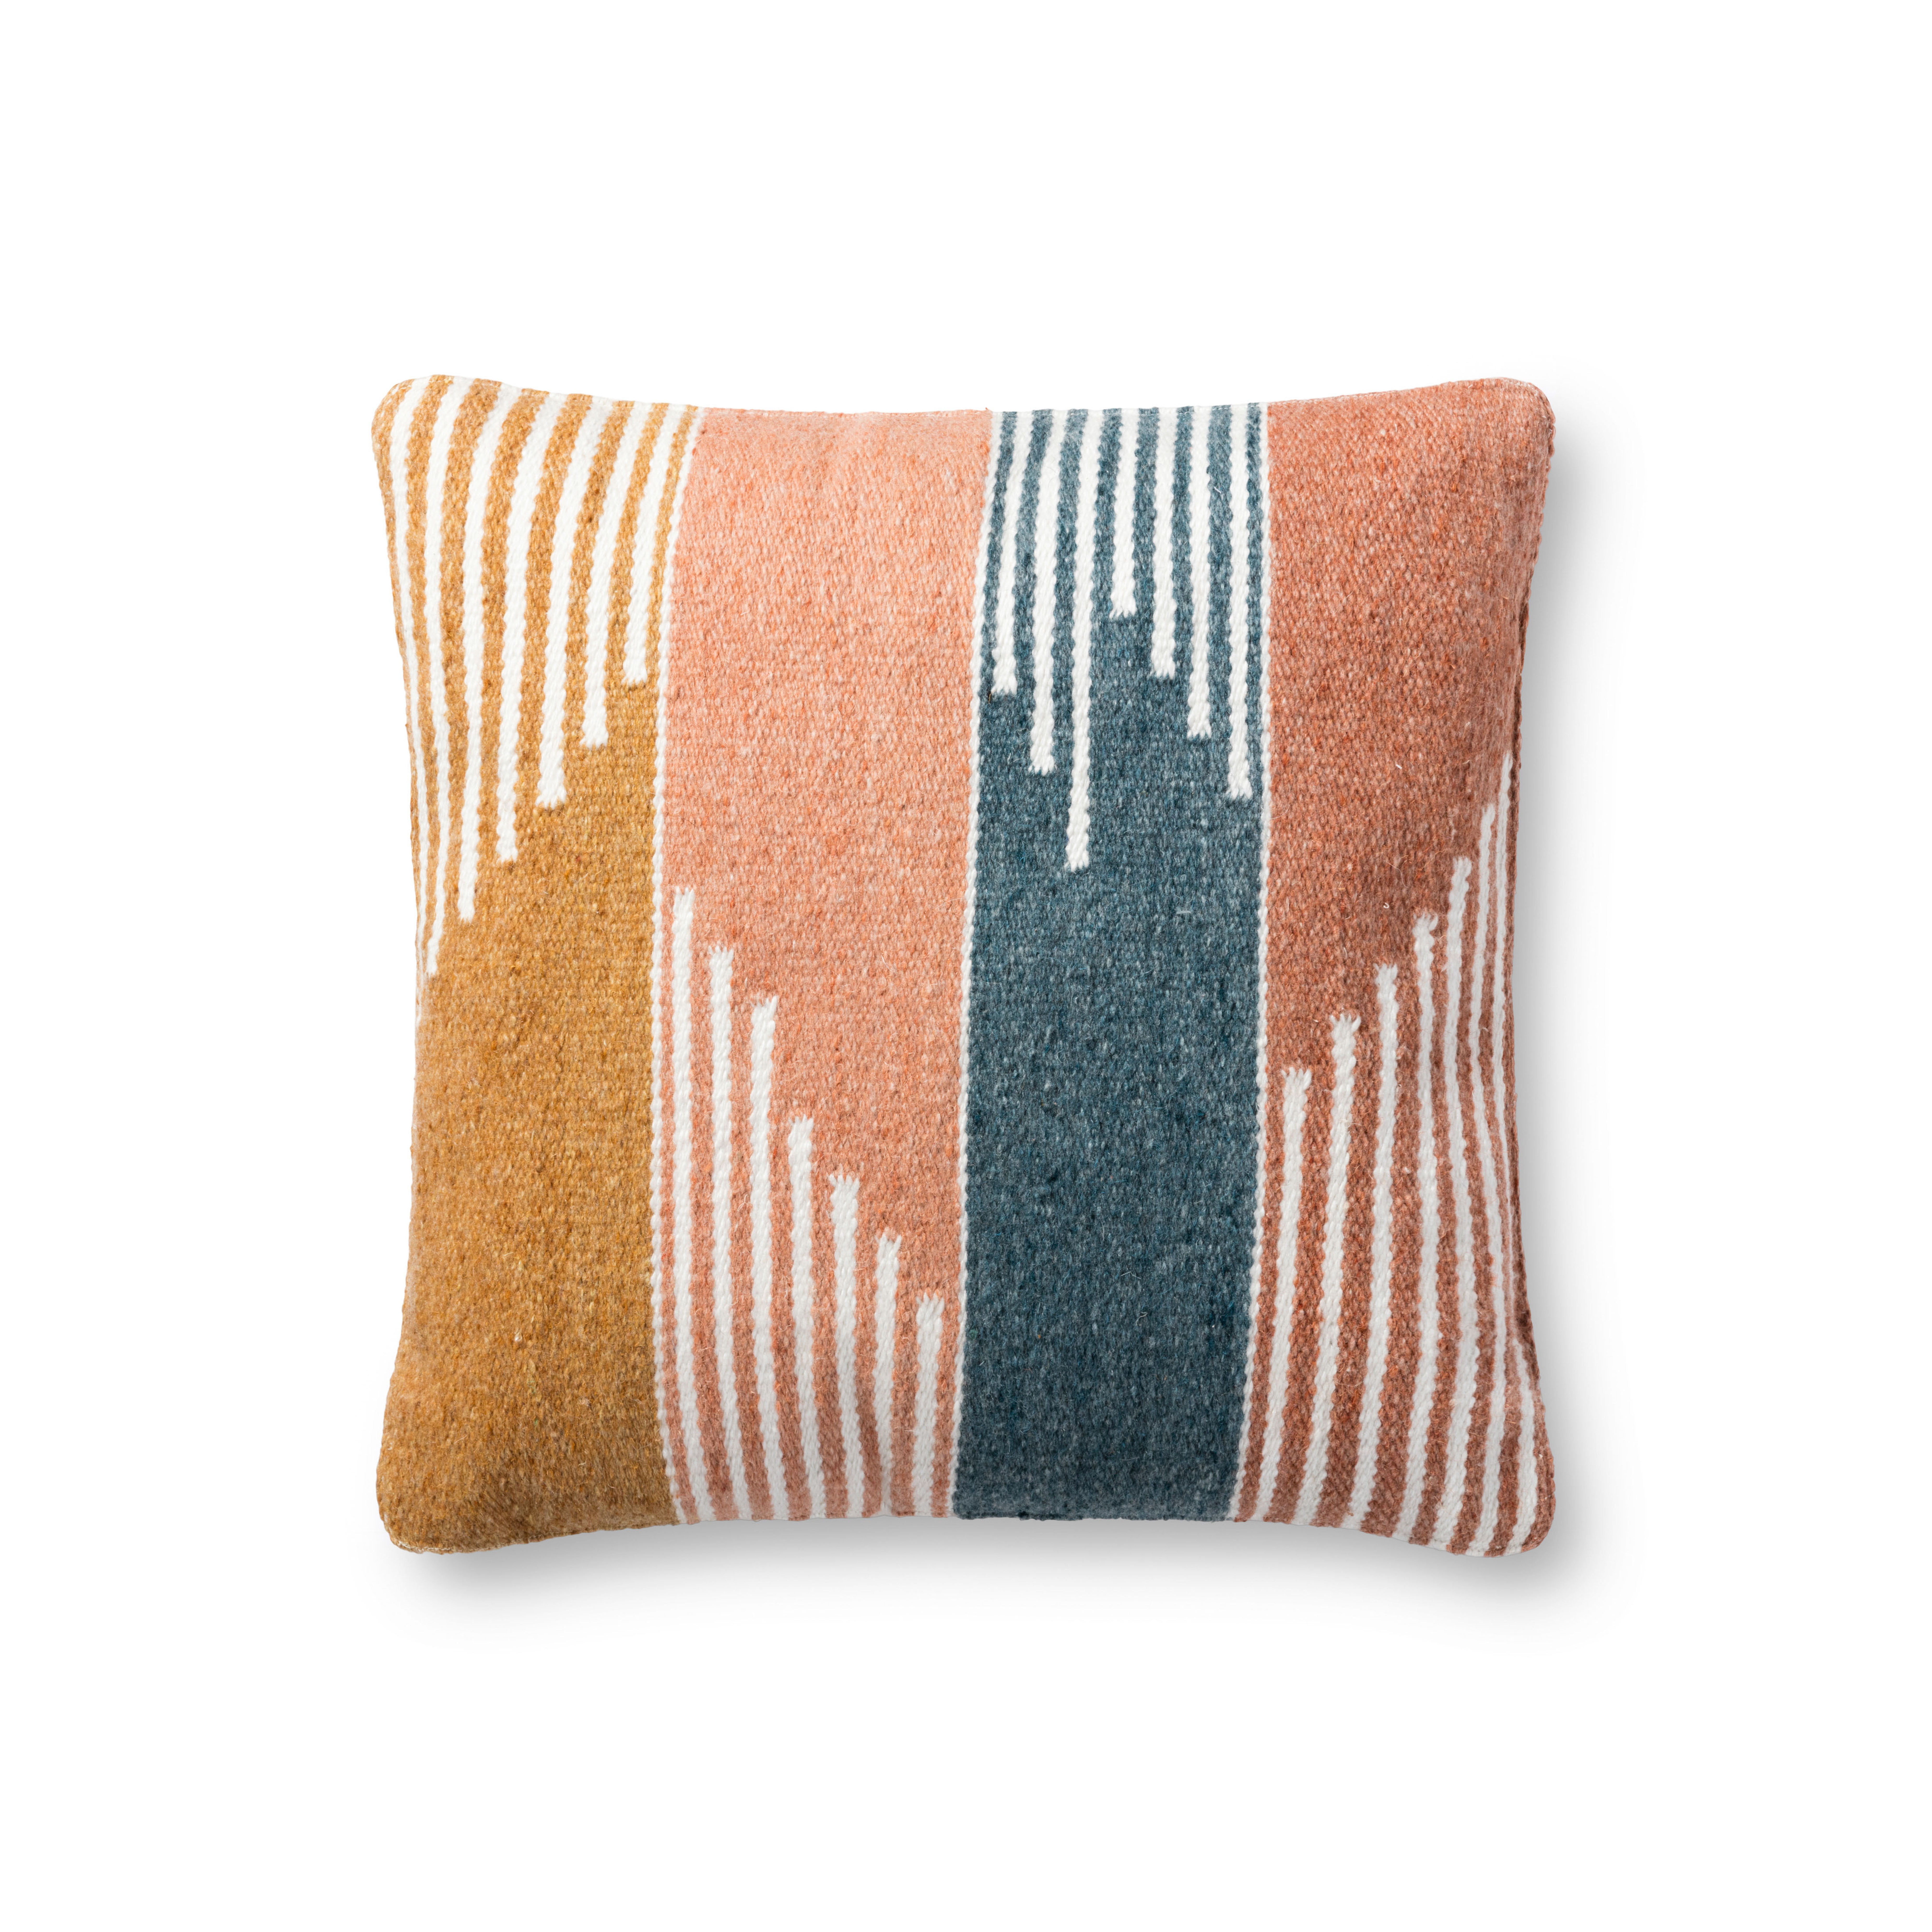 PILLOWS P1148 MULTI 18" x 18" Cover w/Poly - Magnolia Home by Joana Gaines Crafted by Loloi Rugs